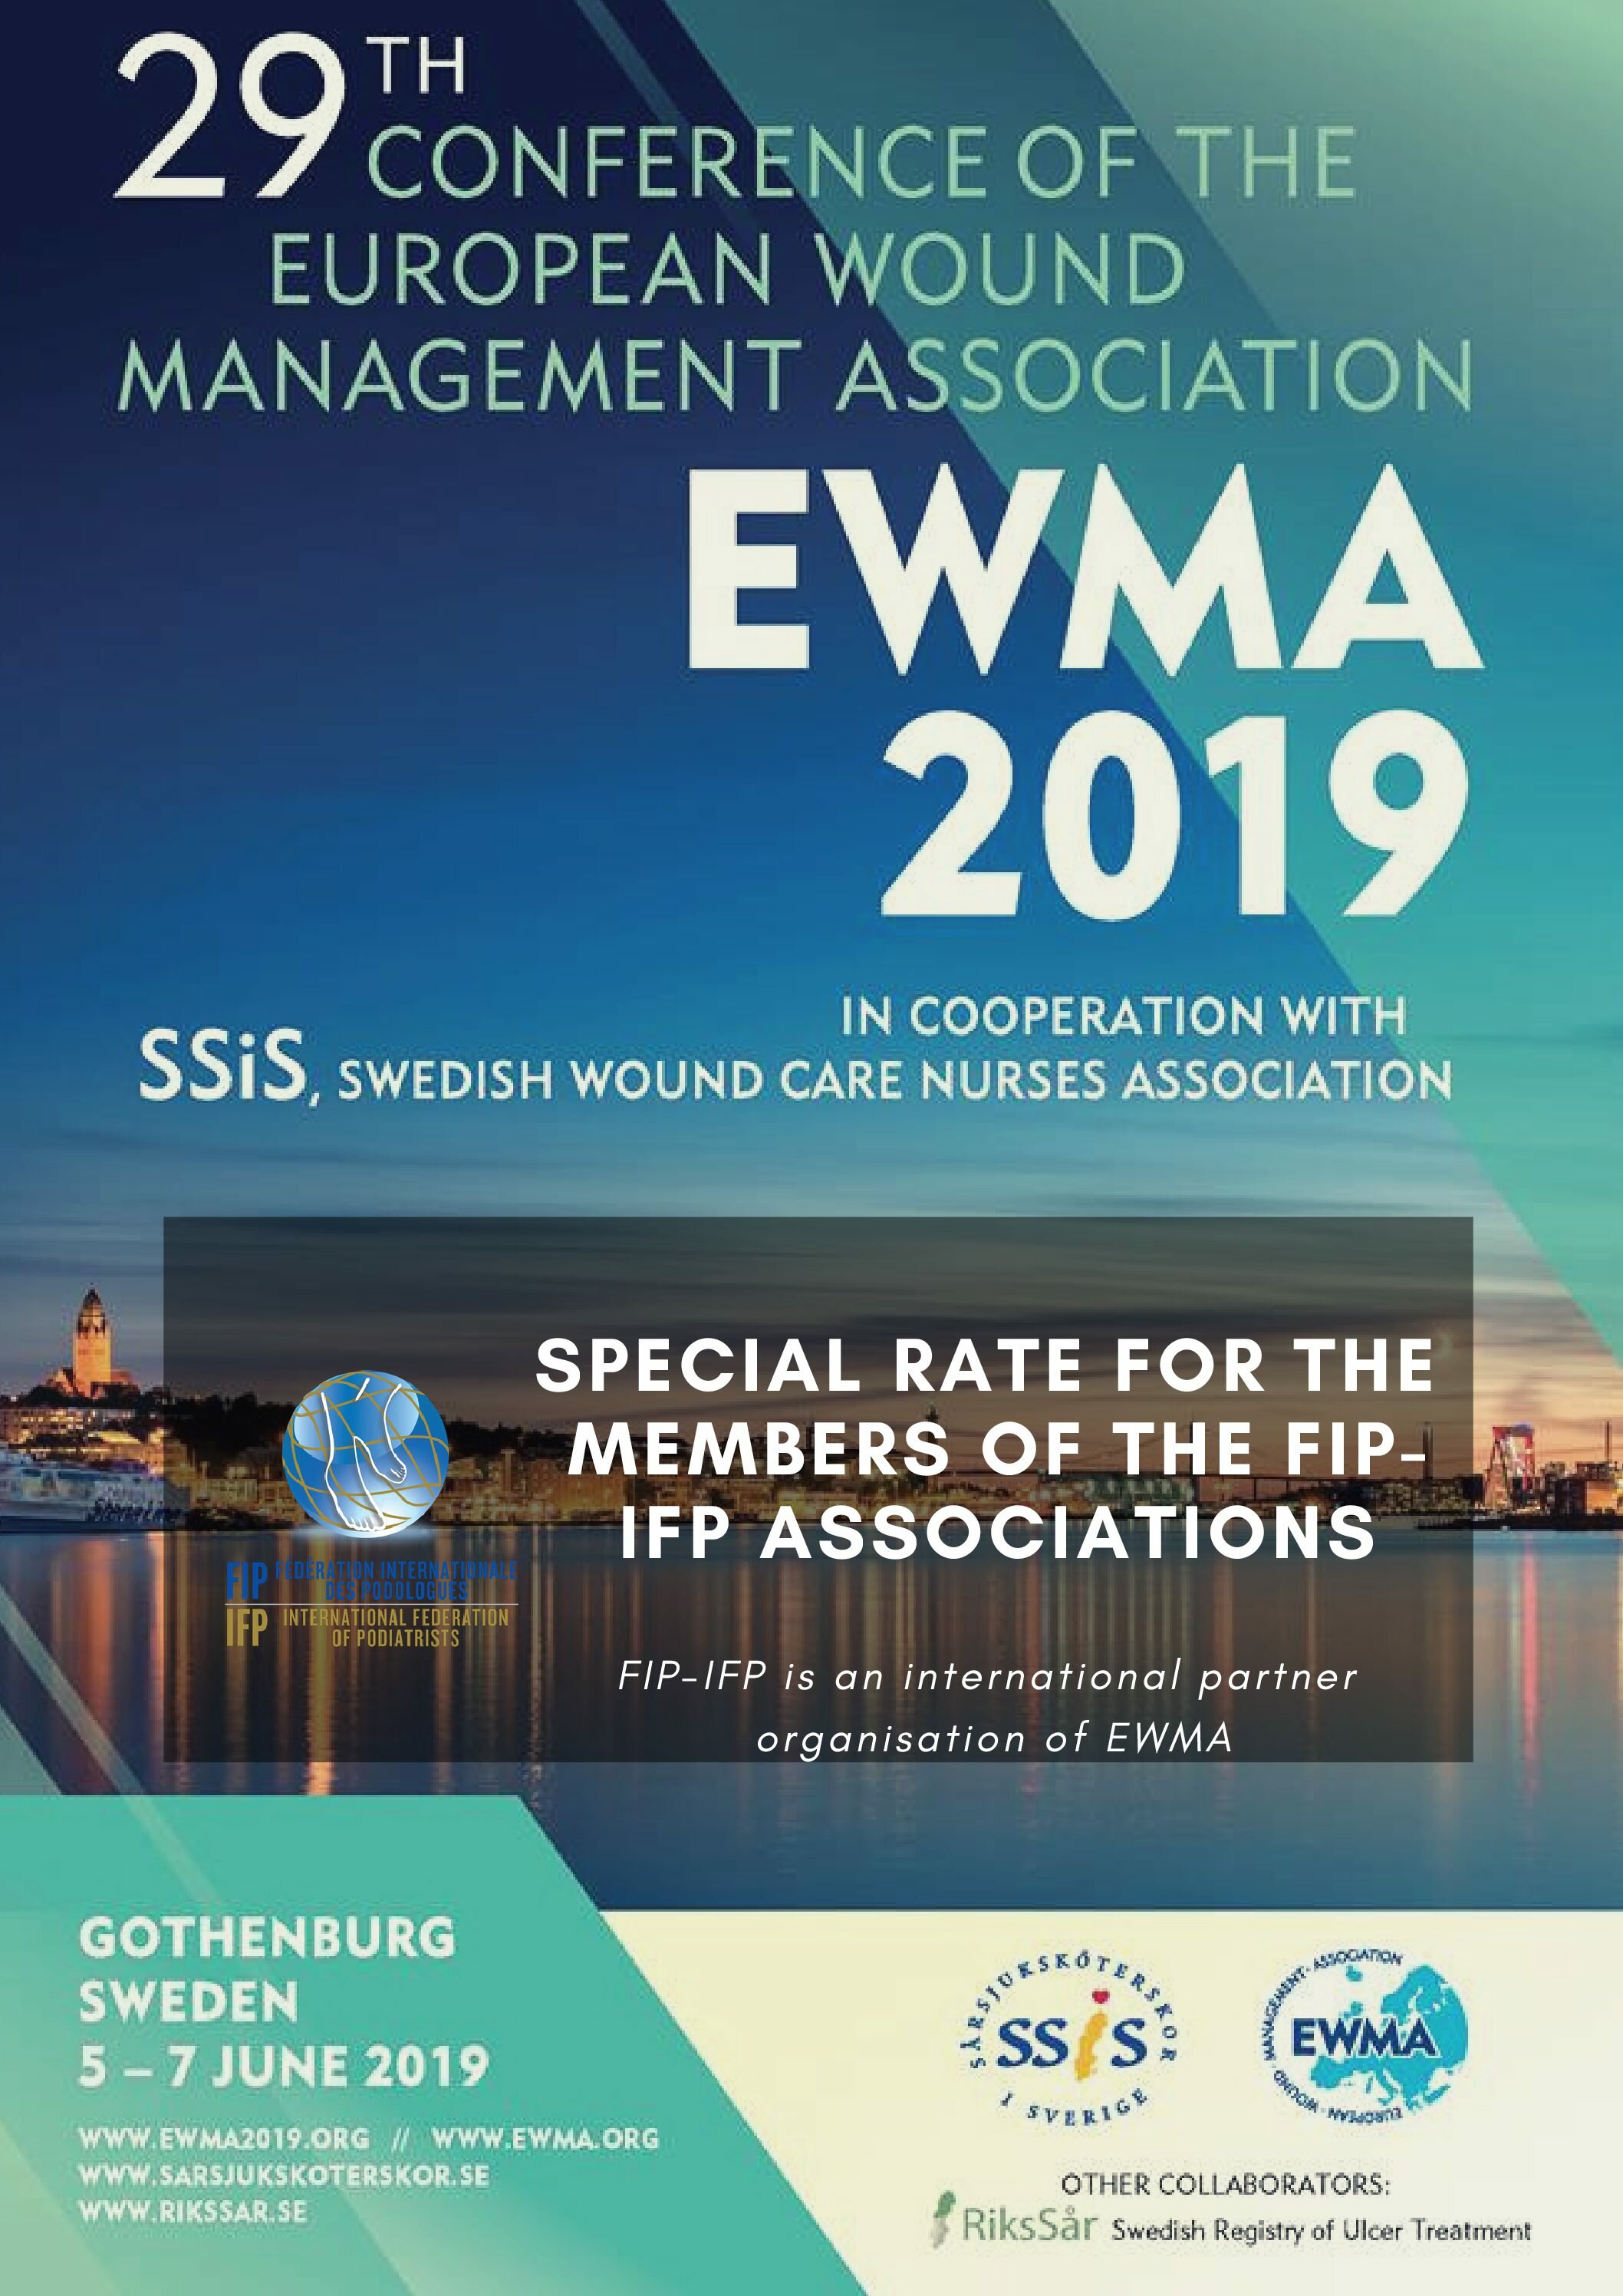 EWMA: special rates for FIP-IFP associations